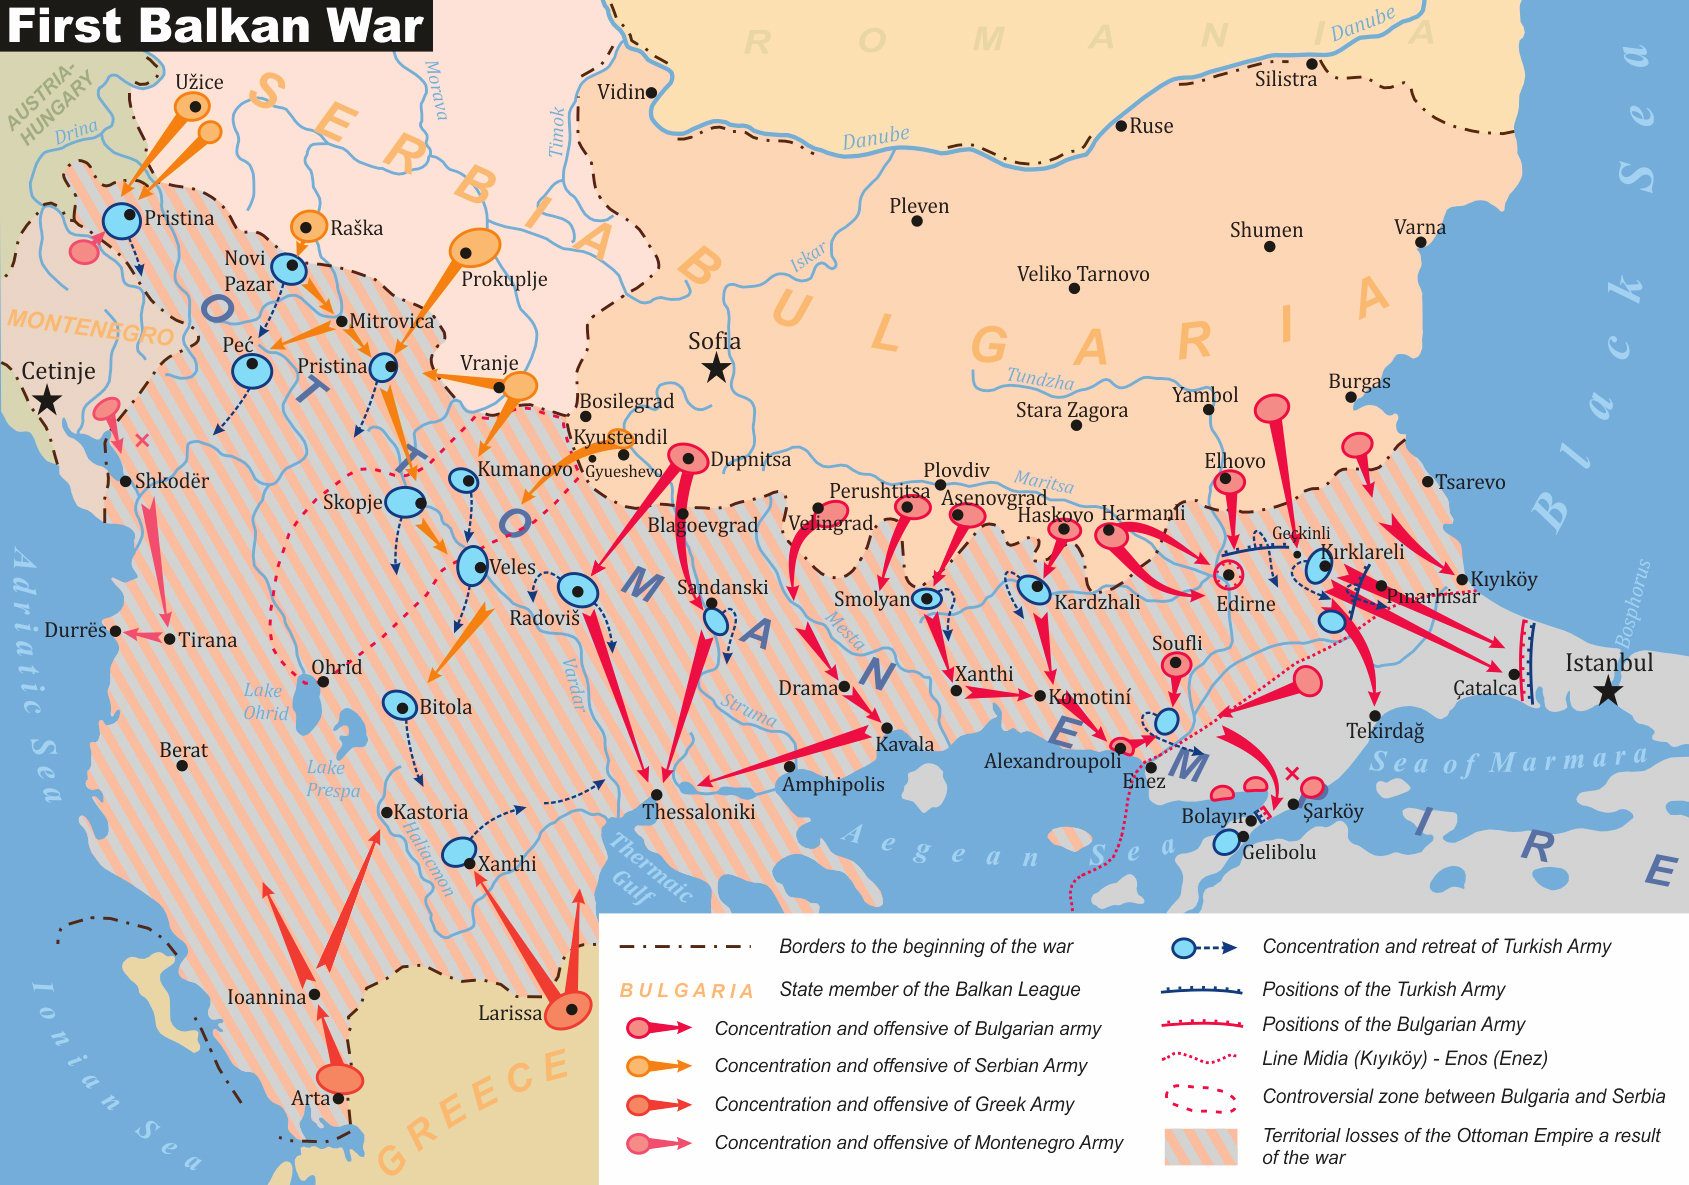 A detailed map illustrating the military movements and strategic positions during the First Balkan War. The map covers parts of the Balkan Peninsula, displaying major cities like Sofia and Istanbul.Various colored arrows and symbols indicate the concentration, offensives, and retreats of different national armies: Bulgarian, Serbian, Greek, Montenegrin, and Turkish. Dotted lines show borders at the beginning of the war. The key at the bottom right explains the symbolism: state members of the Balkan League, concentrations and offensives of each army, Turkish army positions and retreats, territorial losses of the Ottoman Empire, and controversial zones between countries.